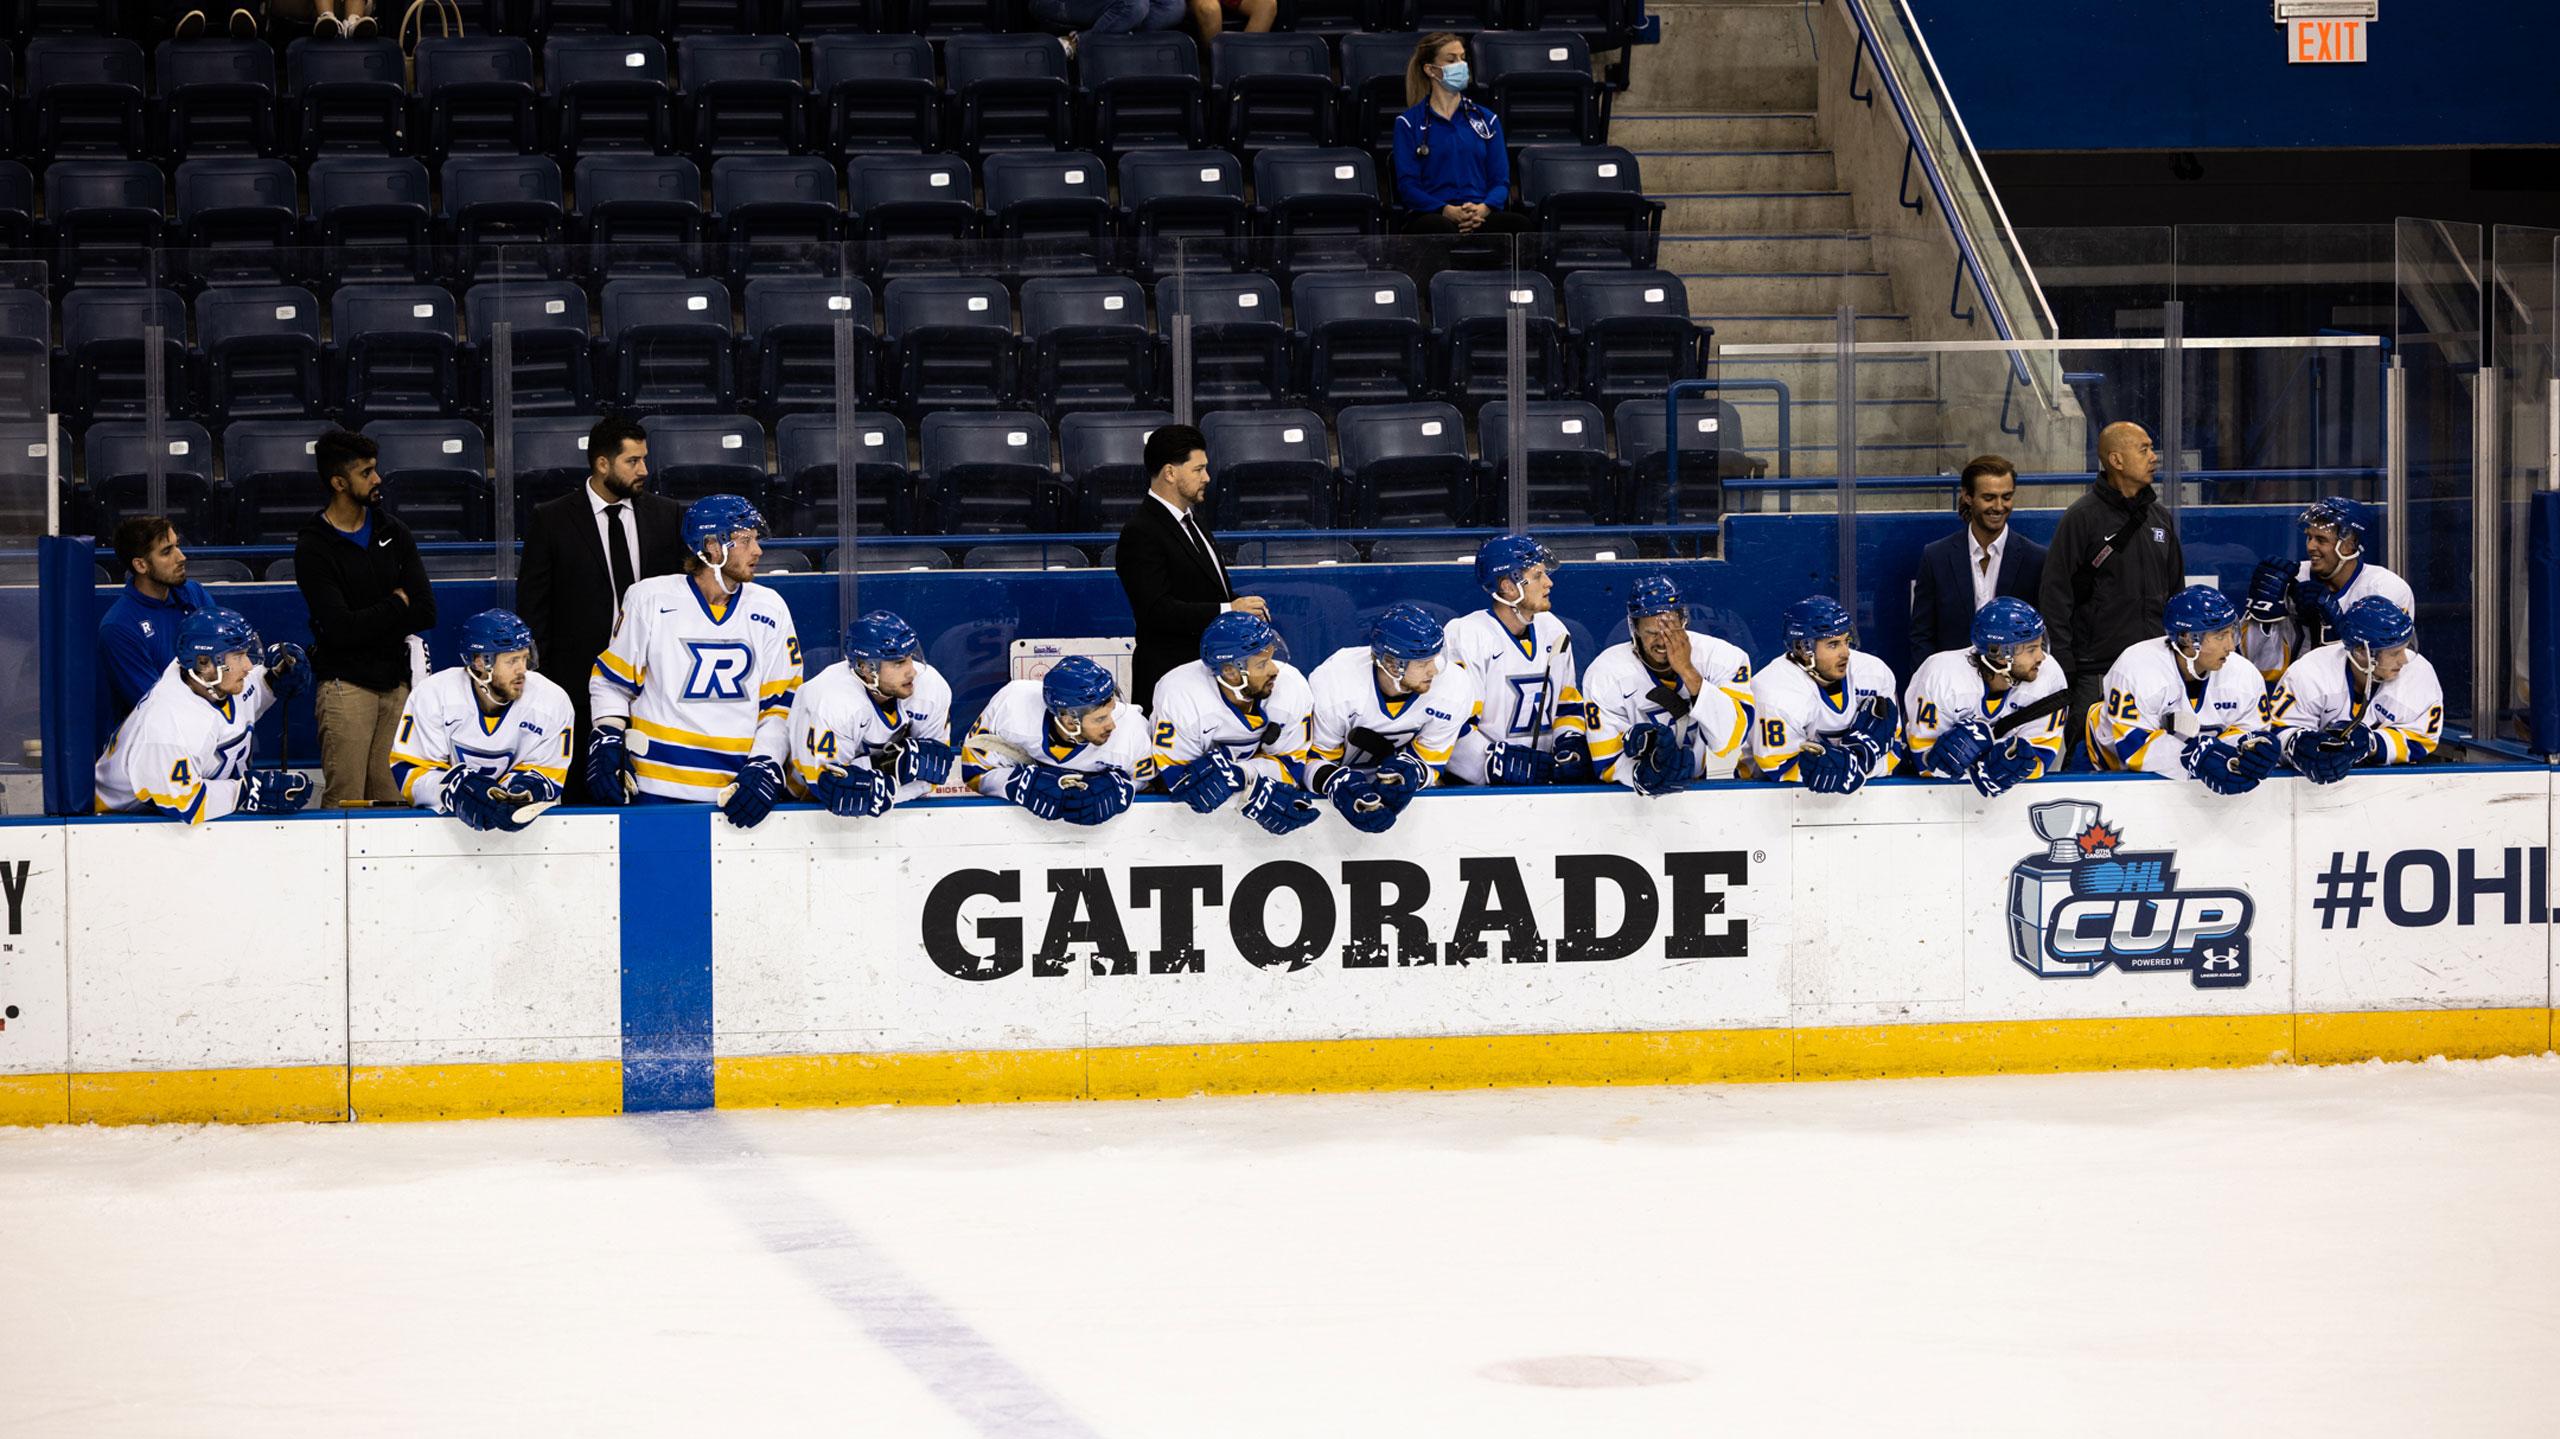 The TMU men's hockey team on the bench in white jerseys